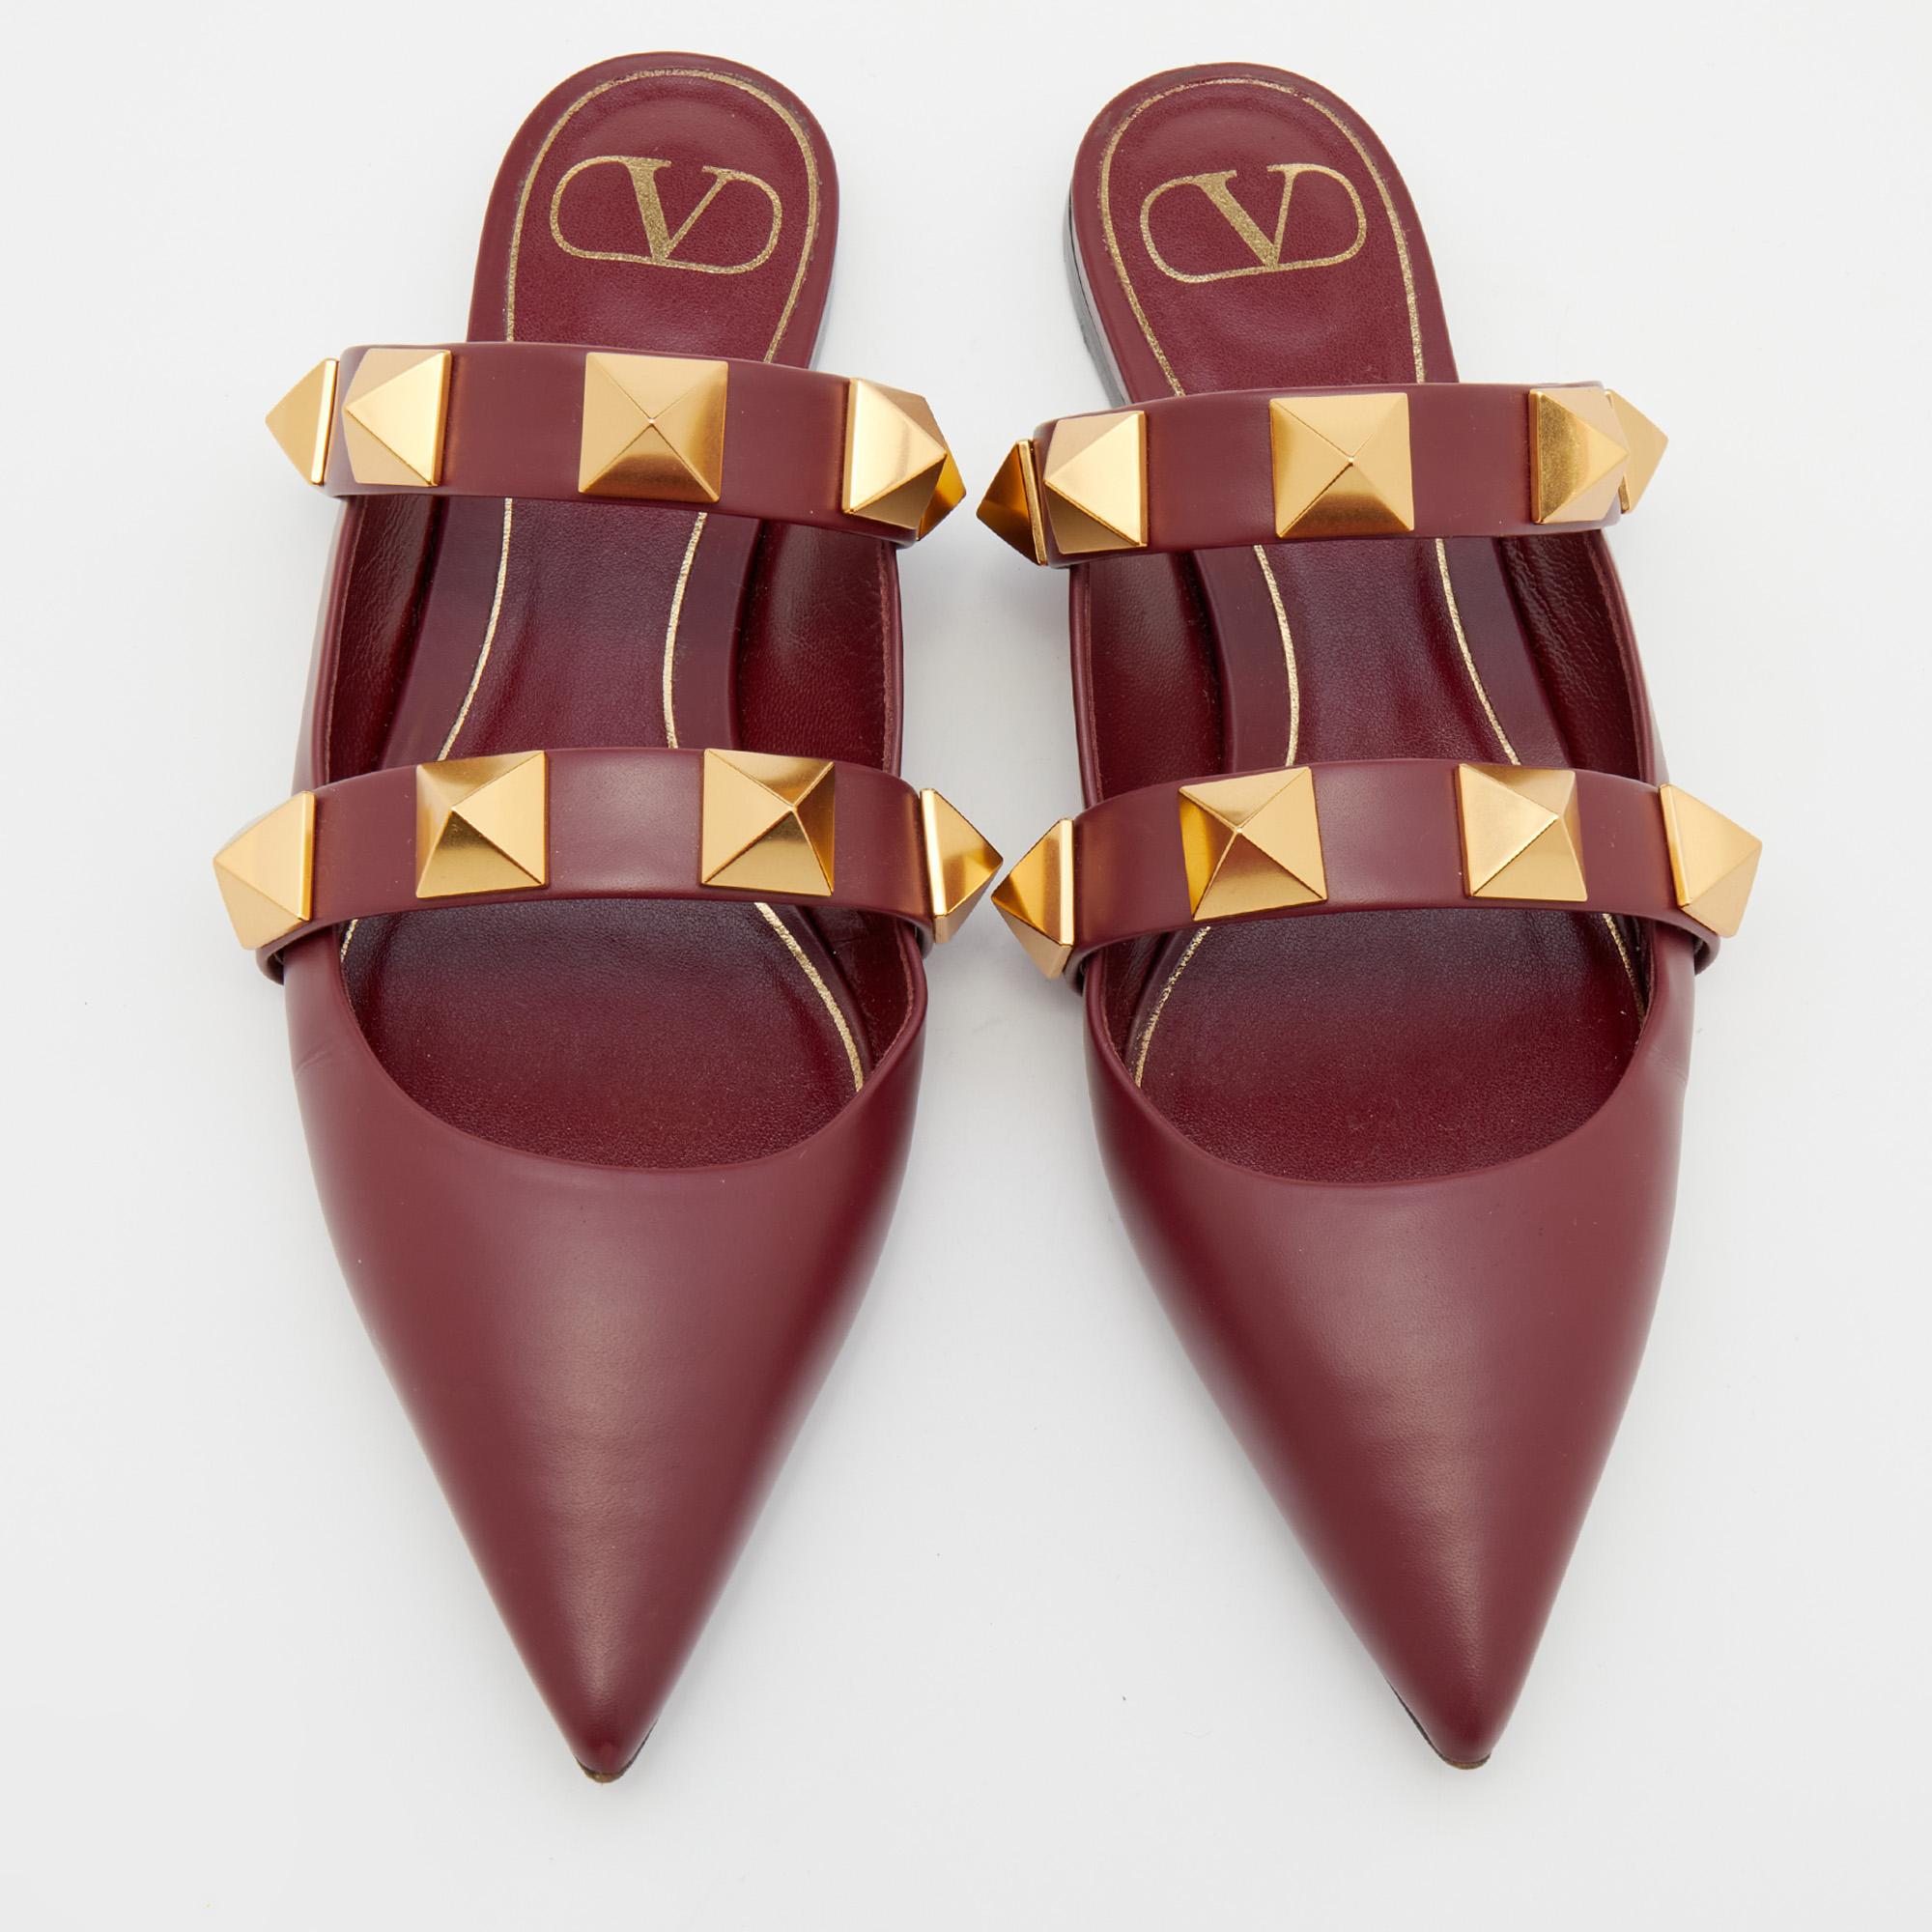 Valentino shoes are known for their unique designs that emanate the label's feminine verve and immaculate craftsmanship that makes their creations last season after season. Crafted from leather in a versatile burgundy shade, the straps are adorned